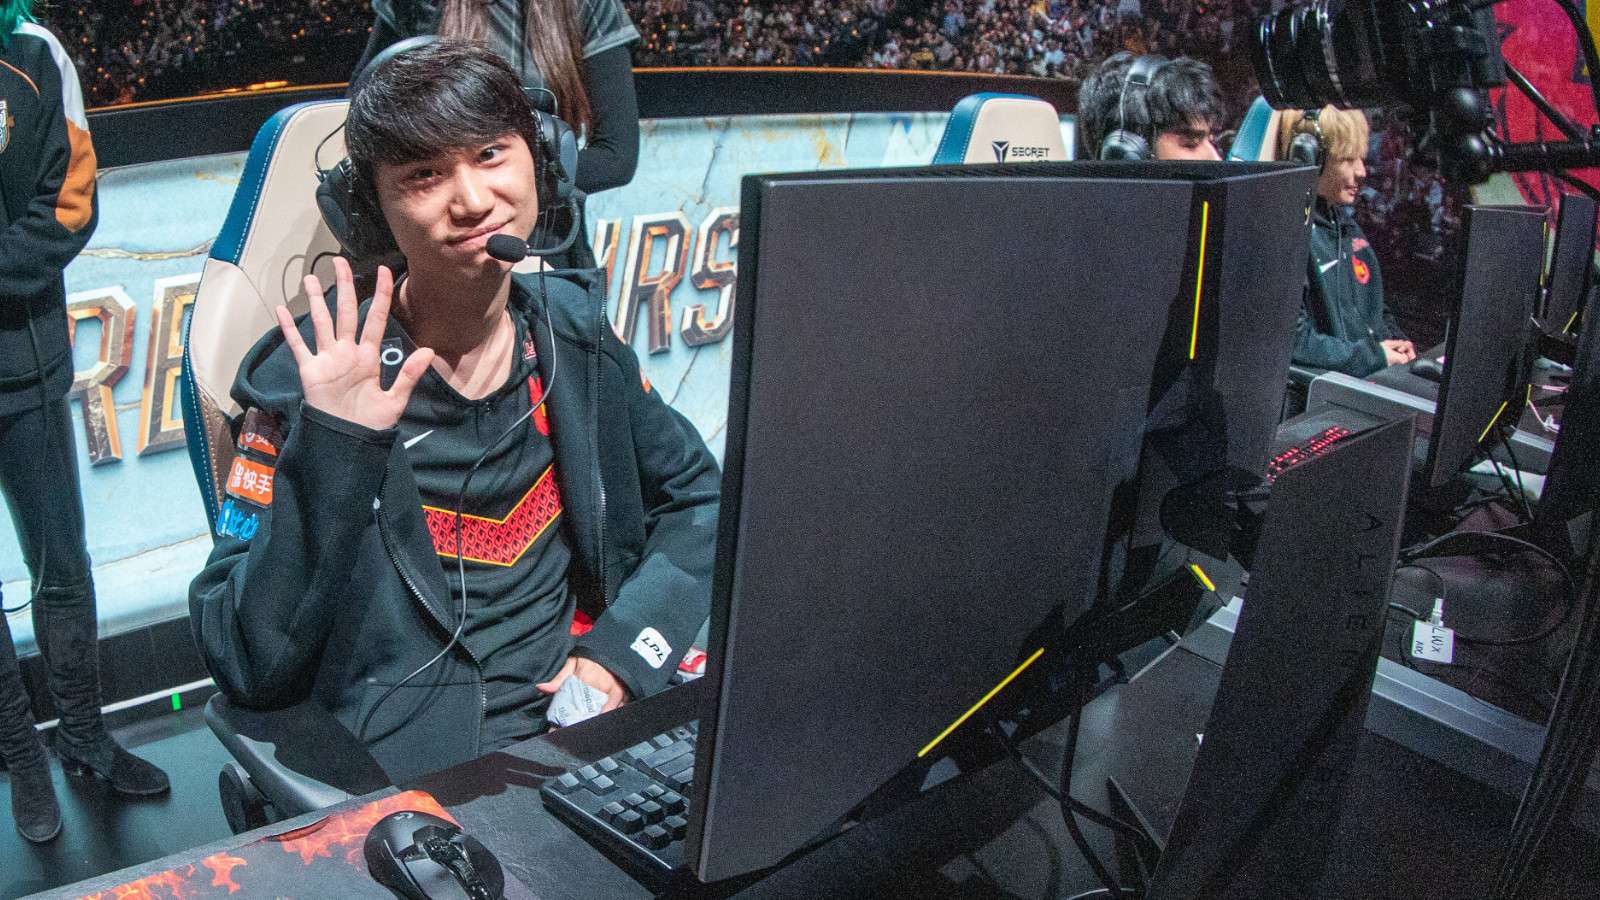 Doinb considered joining the LCS